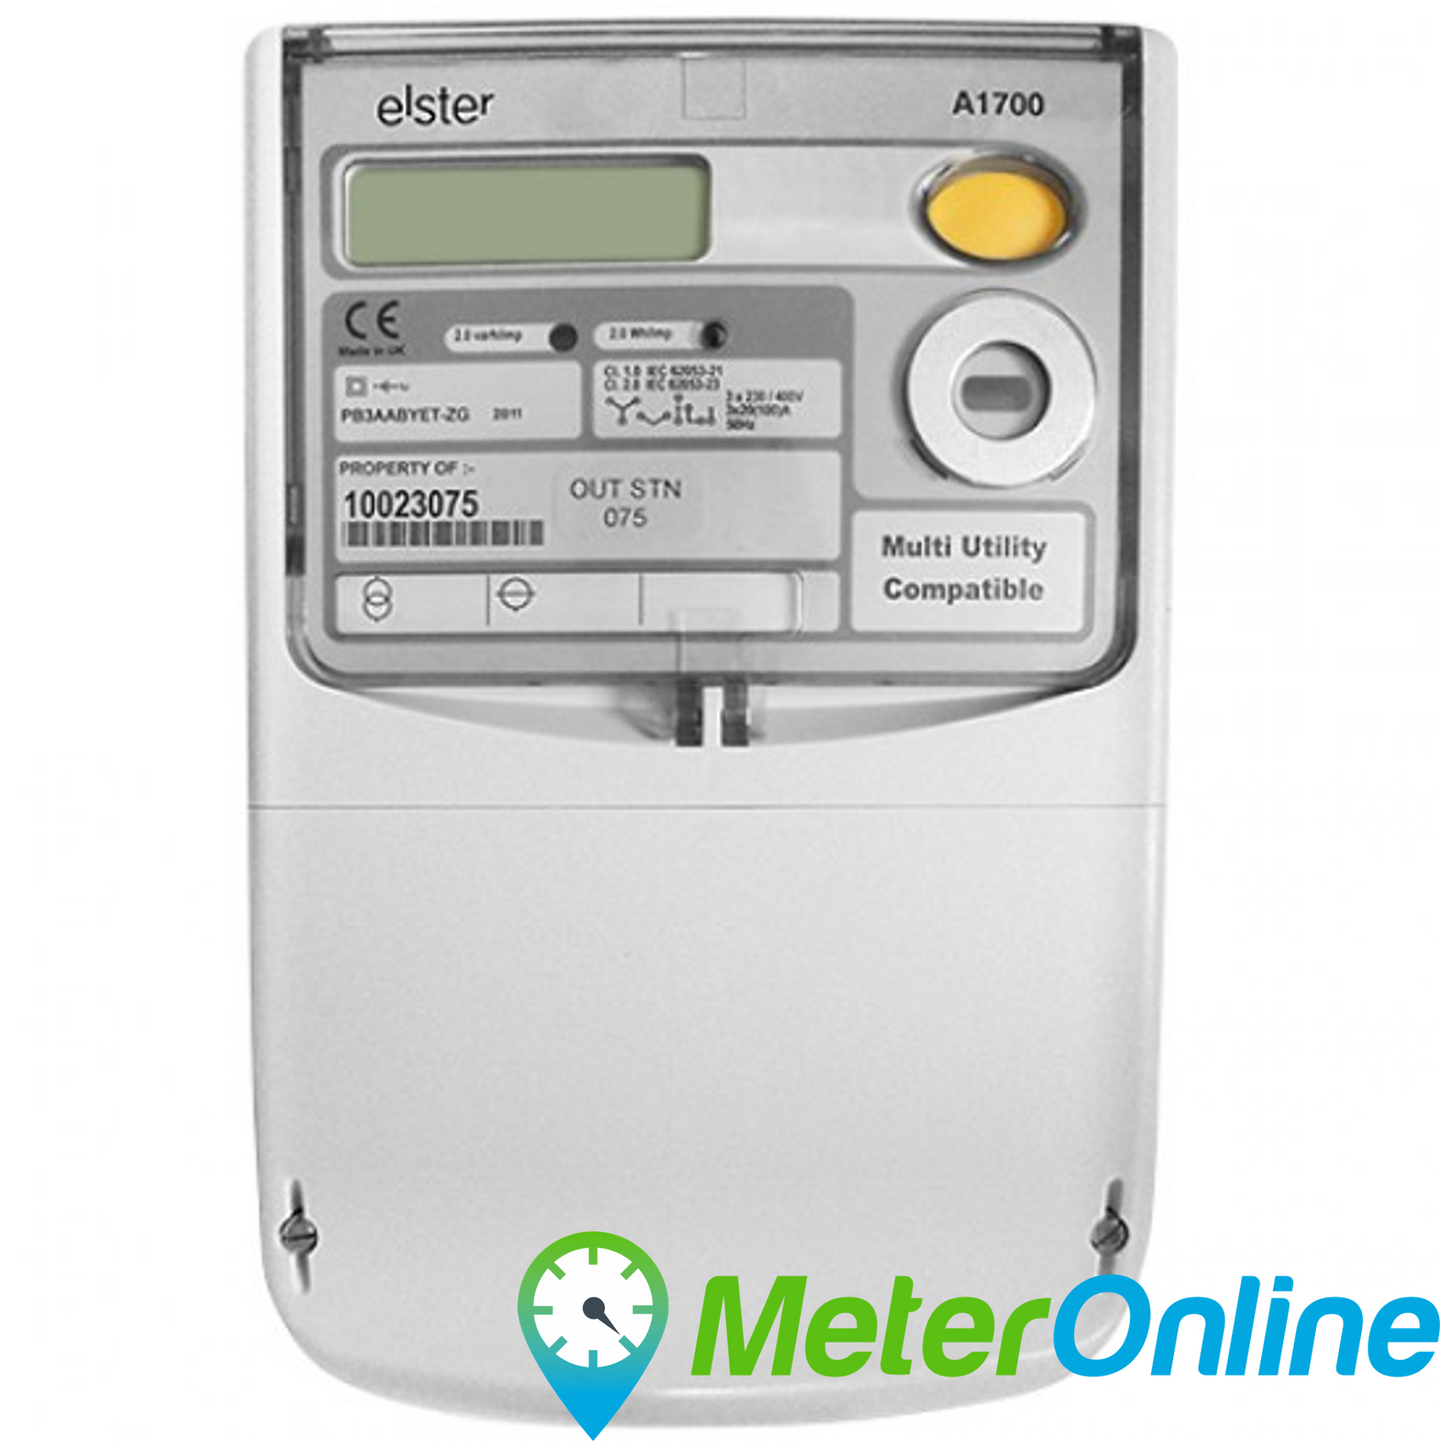 Elster A1700 DC Three Phase Power Analyser ( MeterOnline Ready )